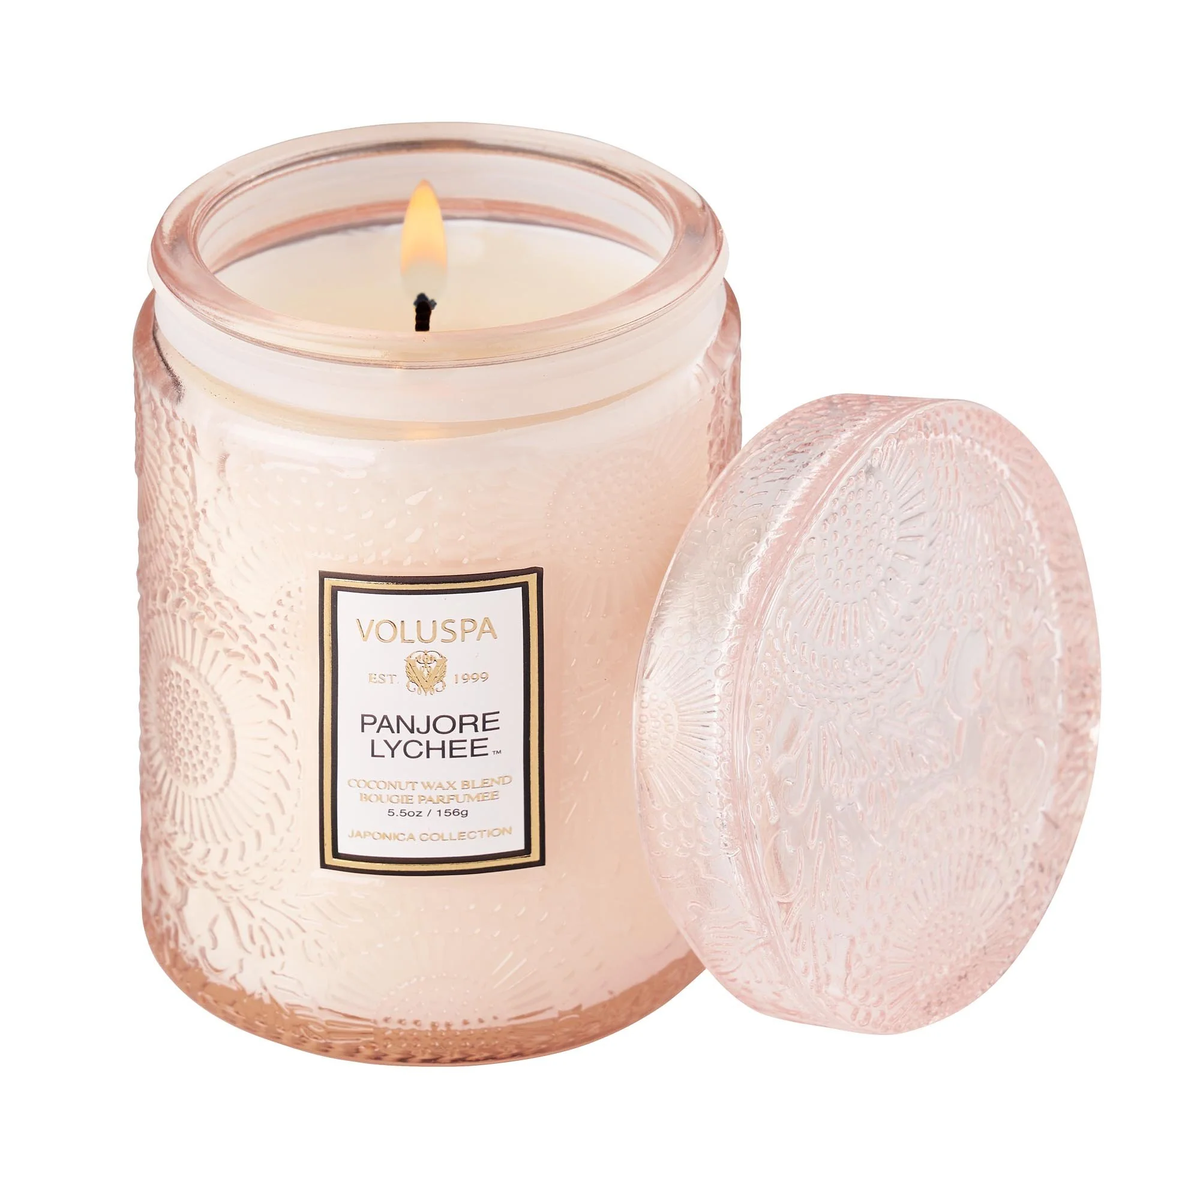 Panjore Lychee Small Glass Jar Candle